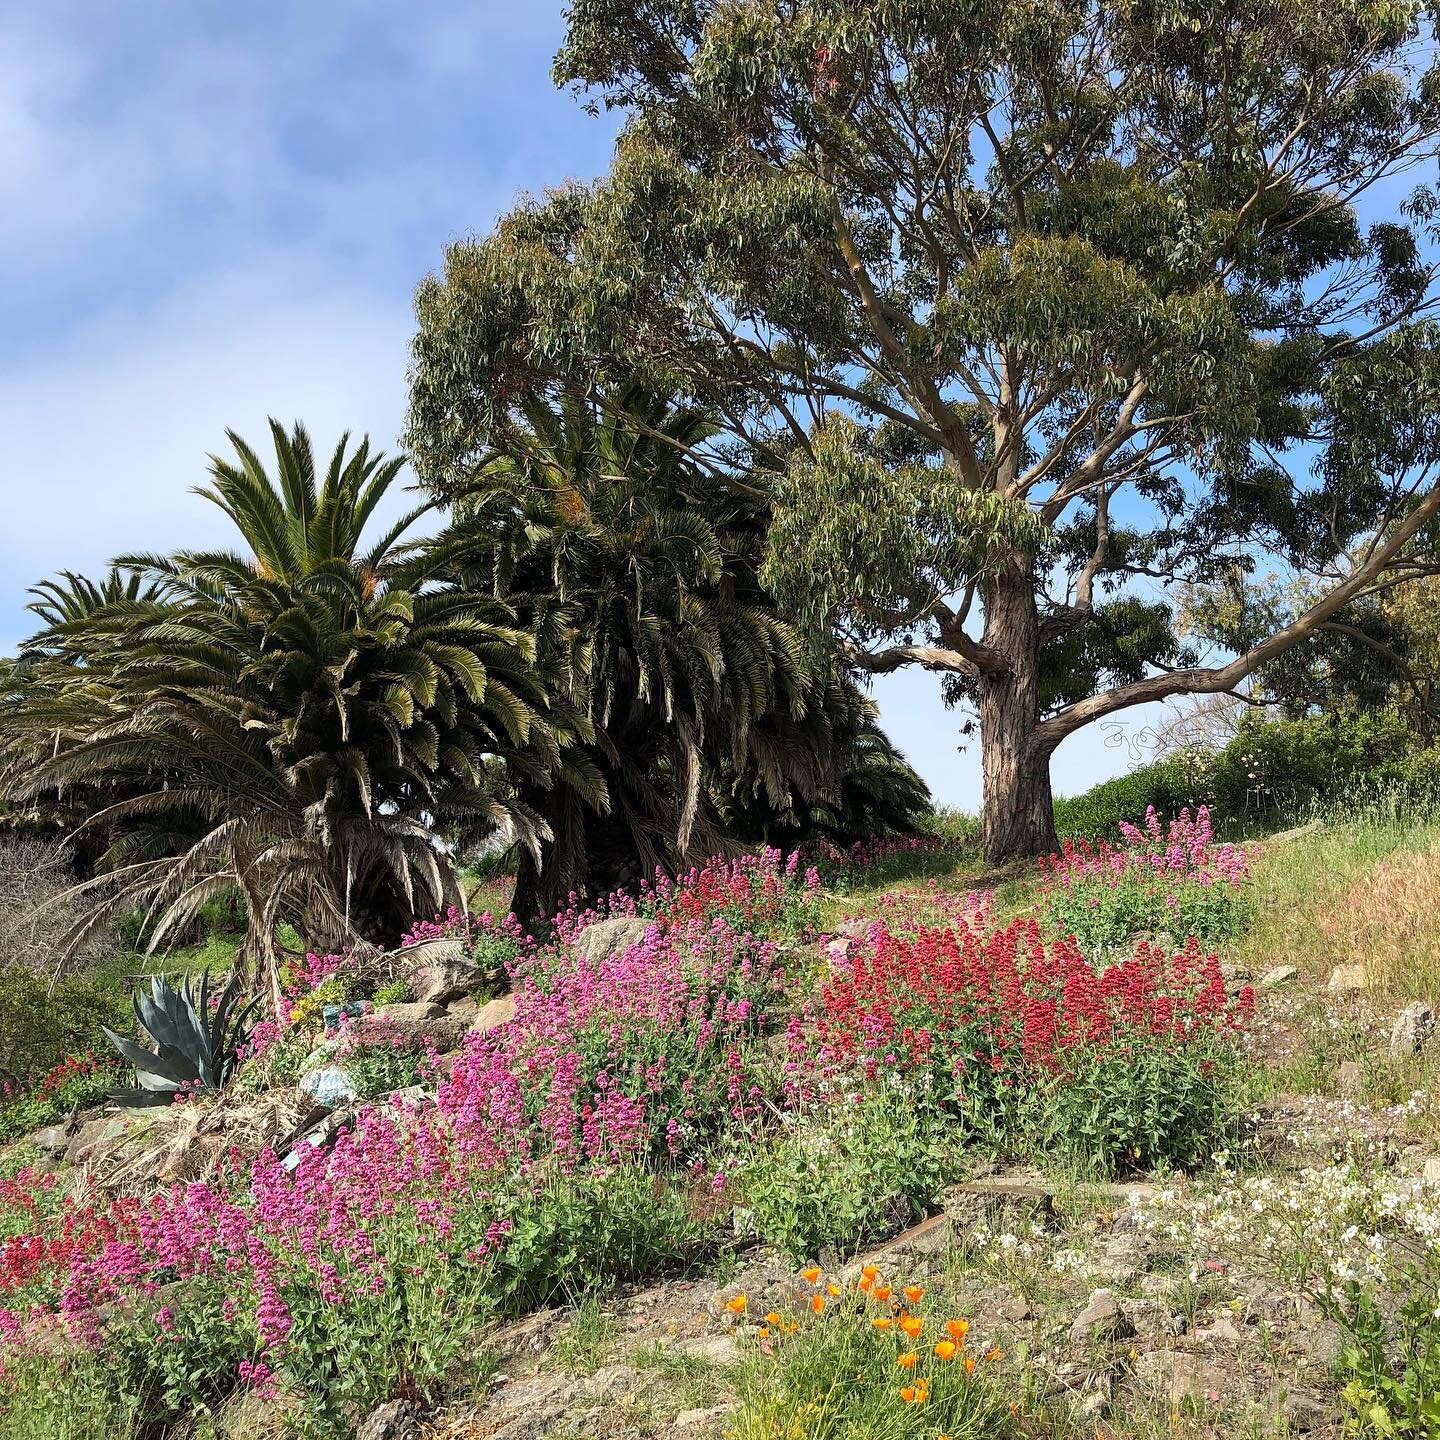 Wildflowers by the bay